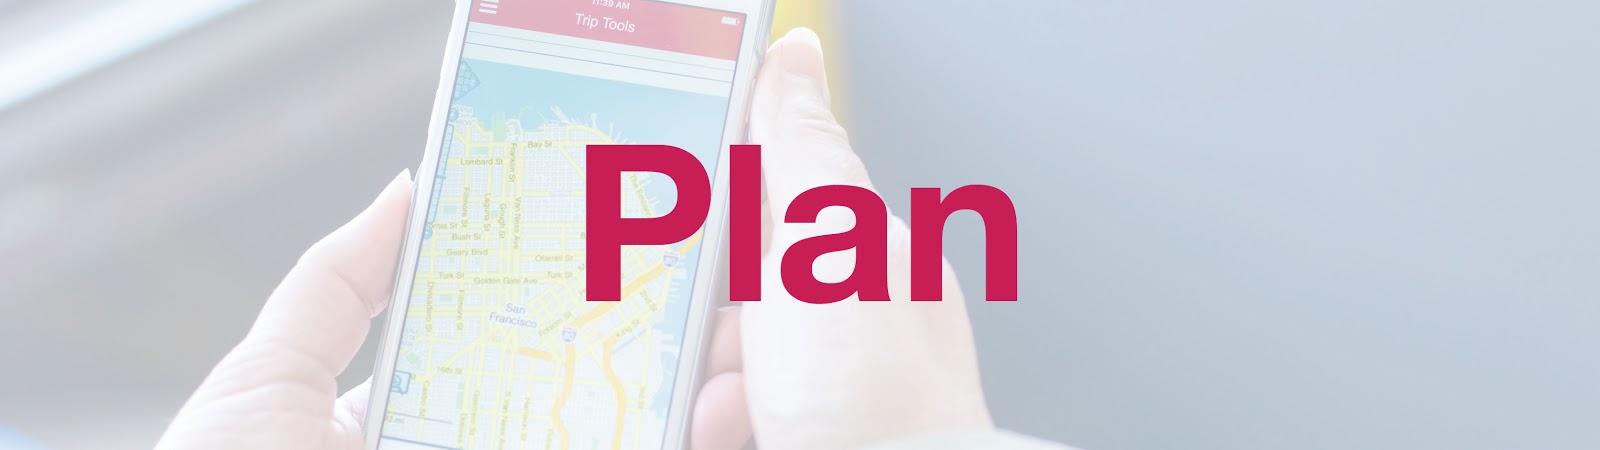 Plan (Image: Hands holding a smartphone with a map open on the screen.)